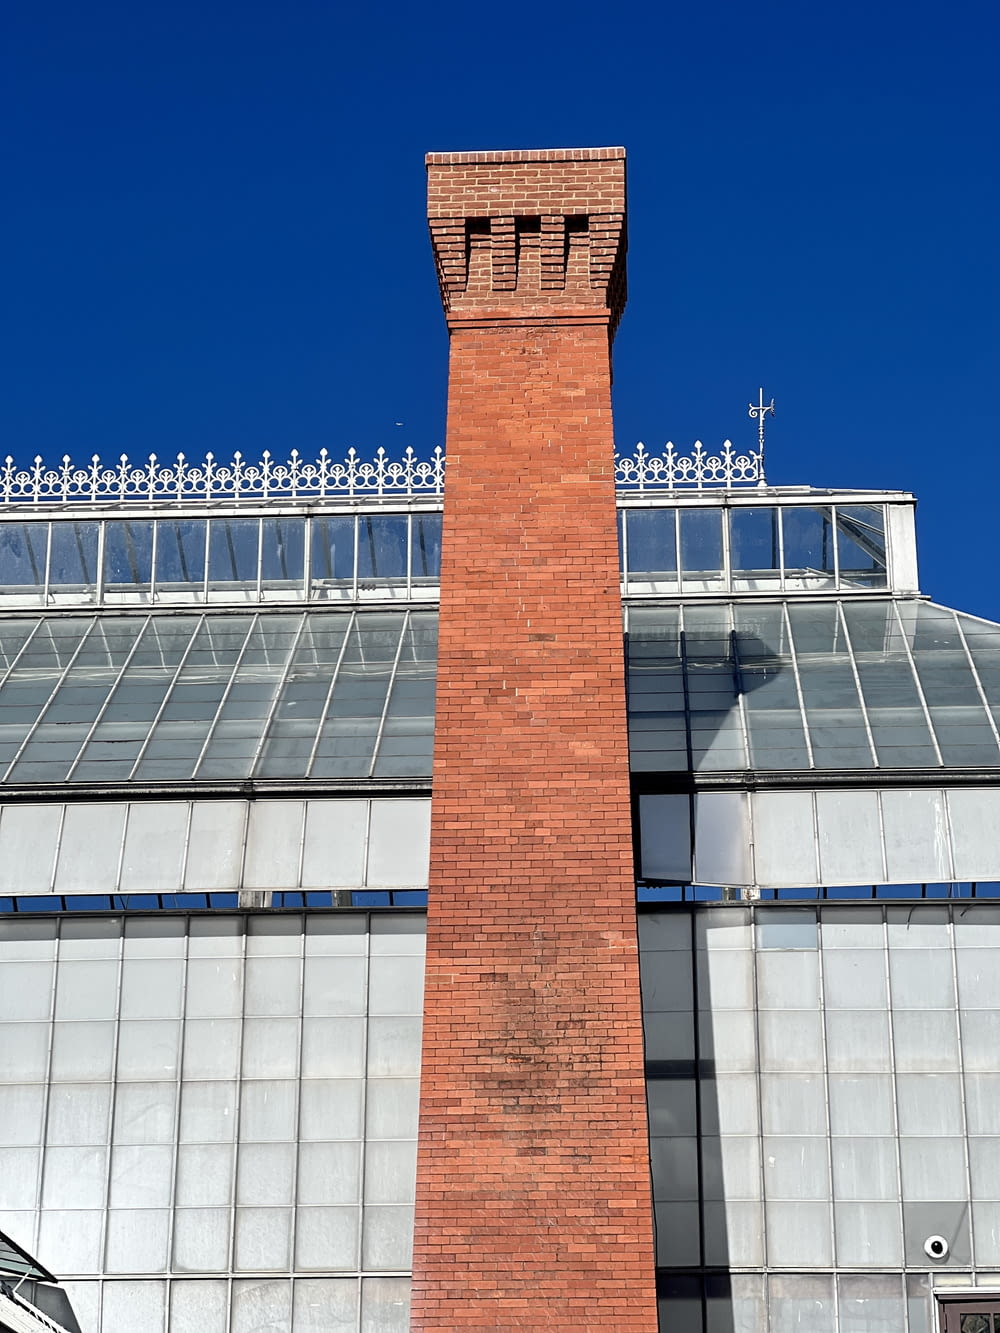 a tall brick tower with a clock on top of it